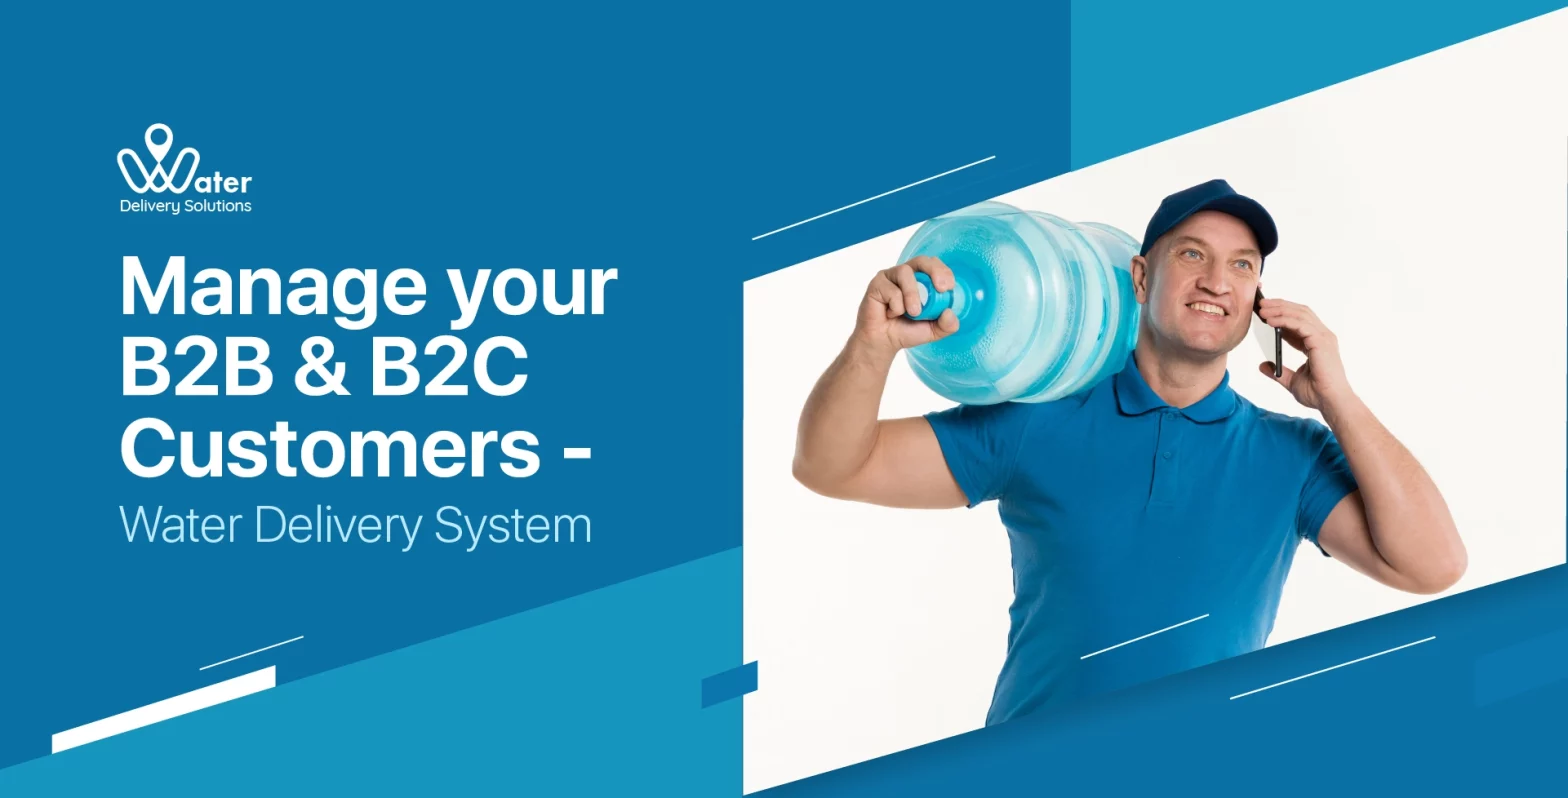 wds-founded-by-ravi-garg-website-insights-manage-your-b2b-and-b2c-customers-water-delivery-system